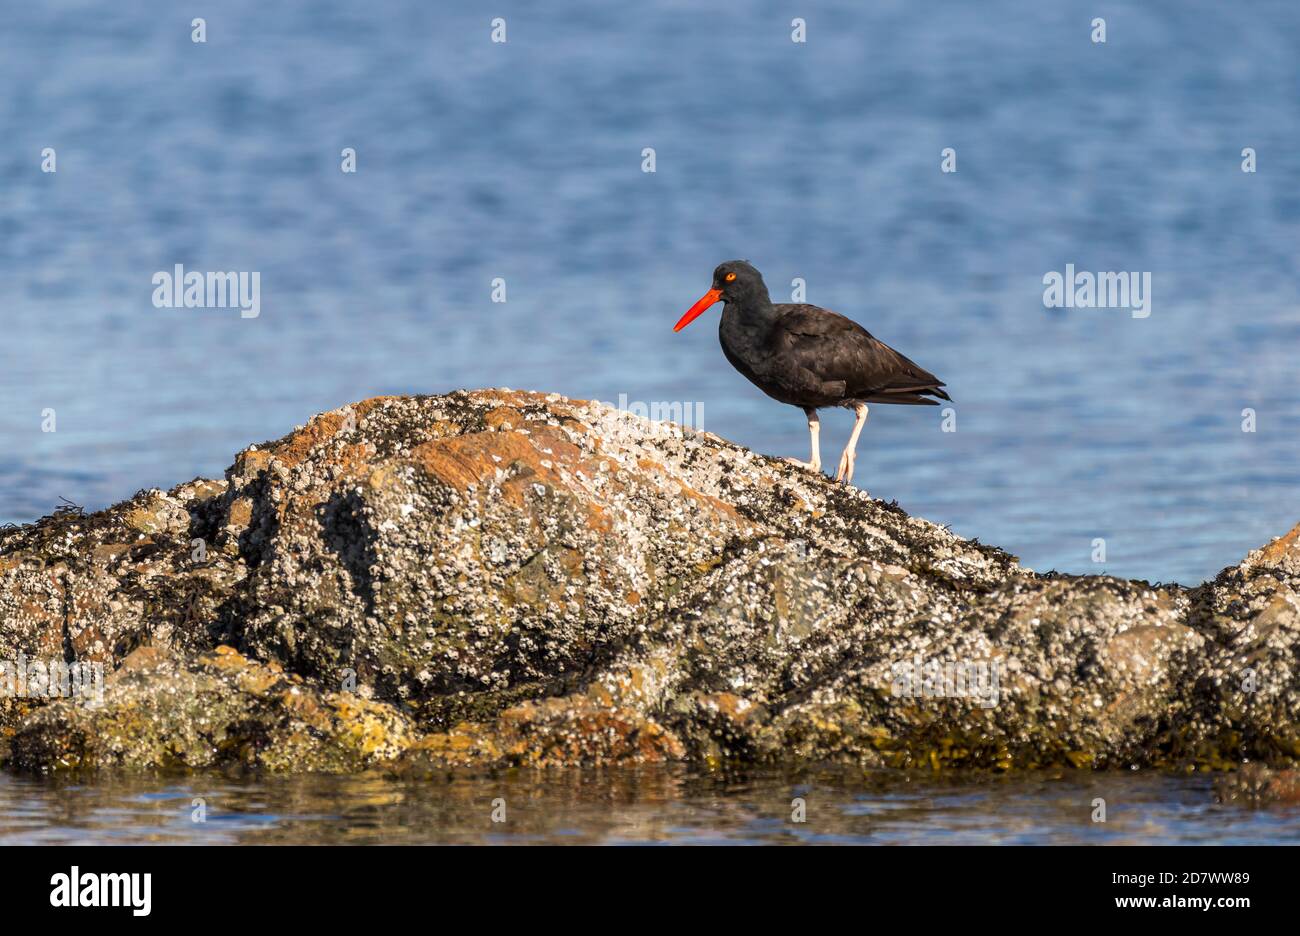 A black oyster catcher ' Haematopus bachmani ' looks for food in a tidal area in British Columbia Canada. Stock Photo